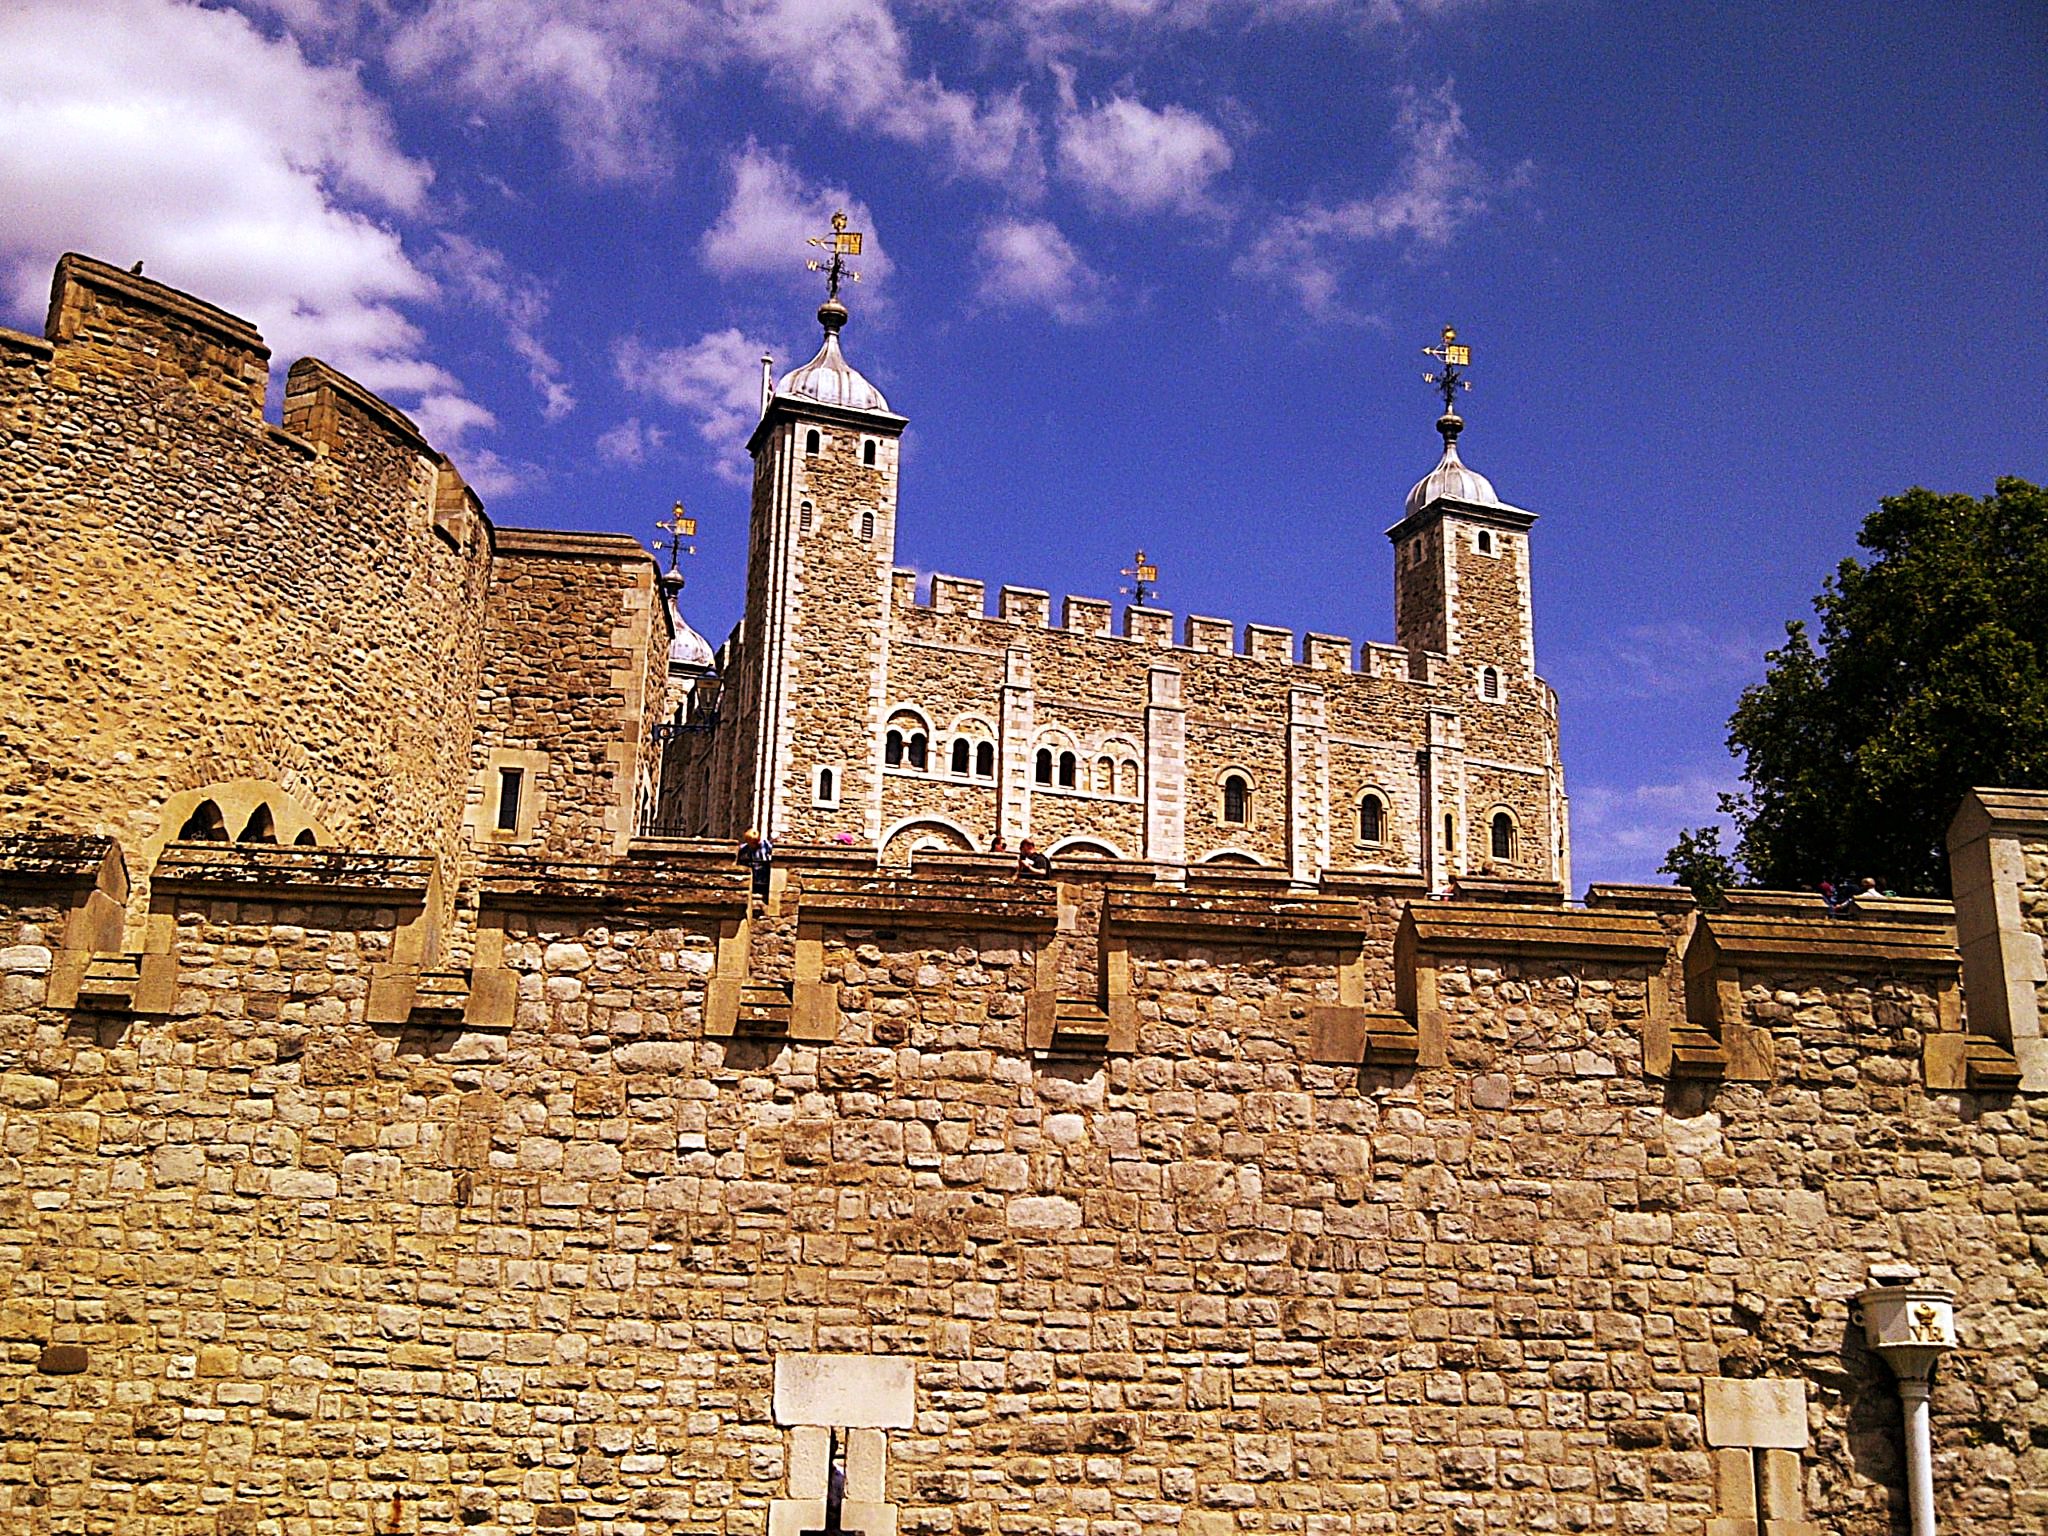 Taking a Tour of the World Famous Tower of London